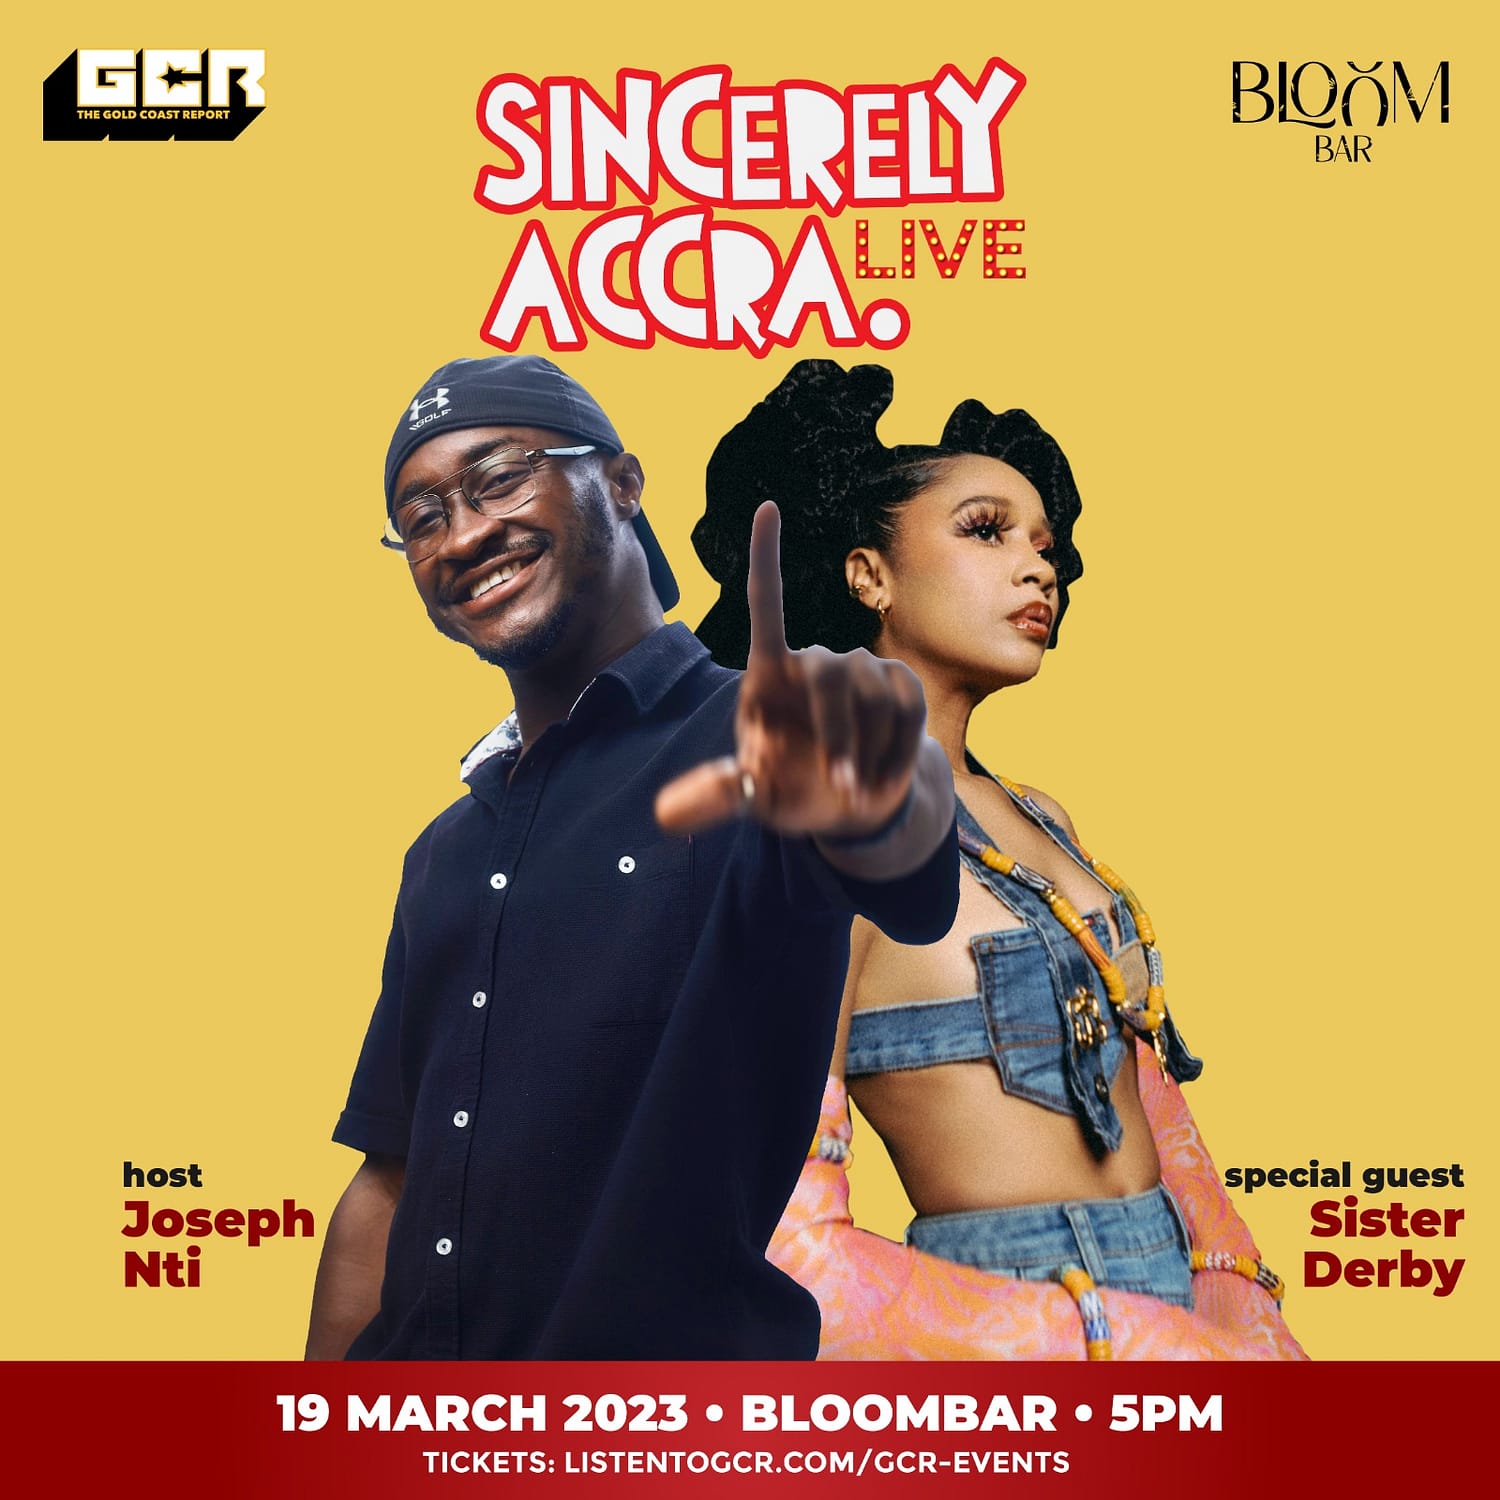 Sincerely Accra Live with Sister Derby